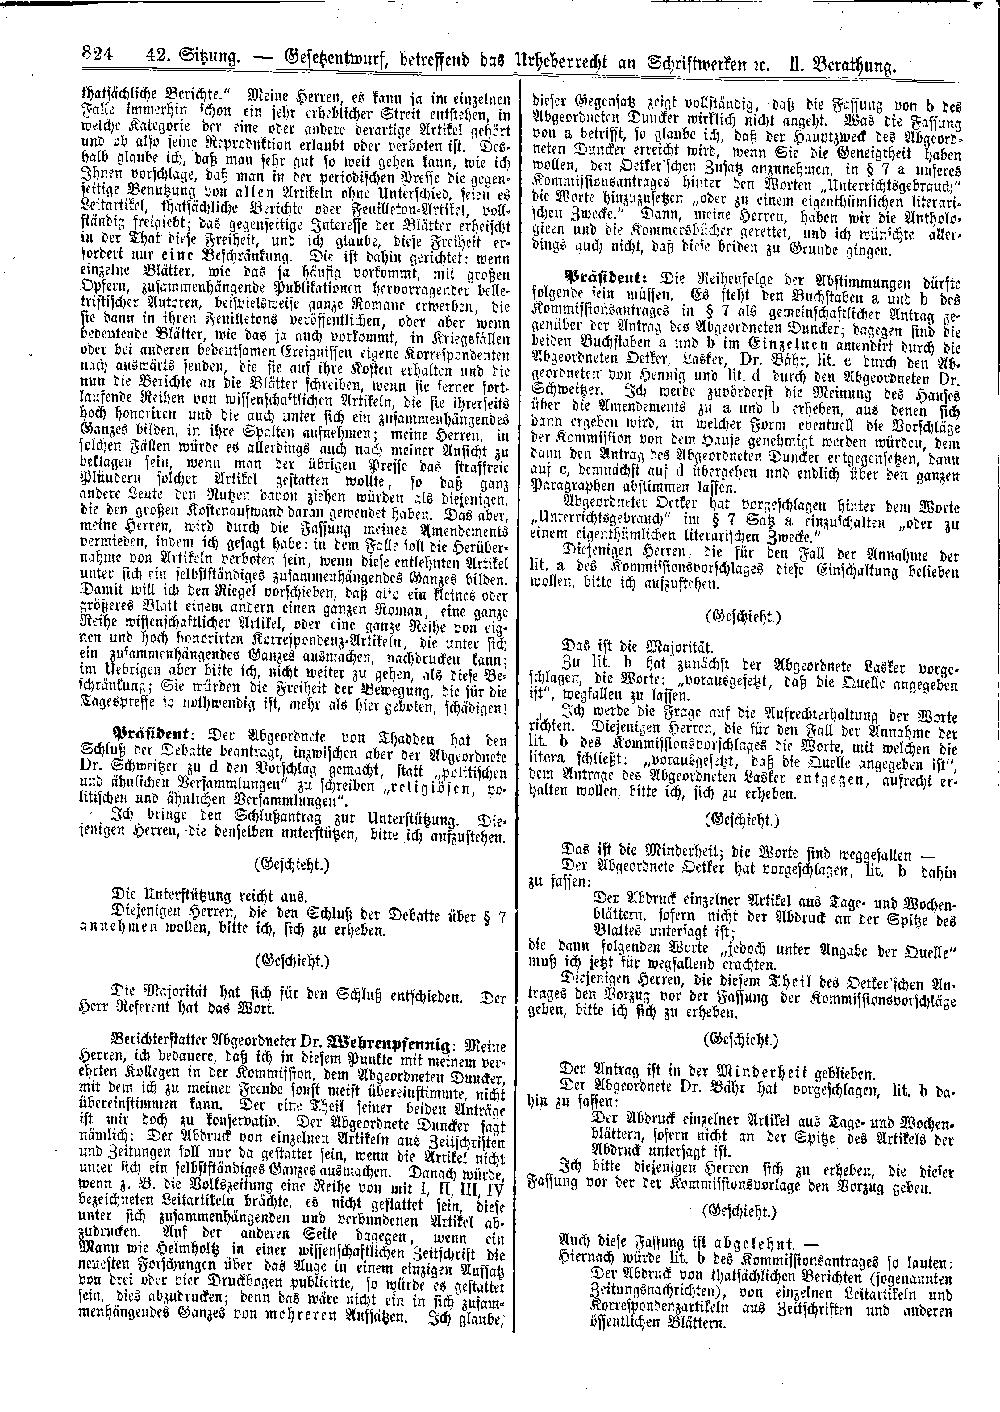 Scan of page 824